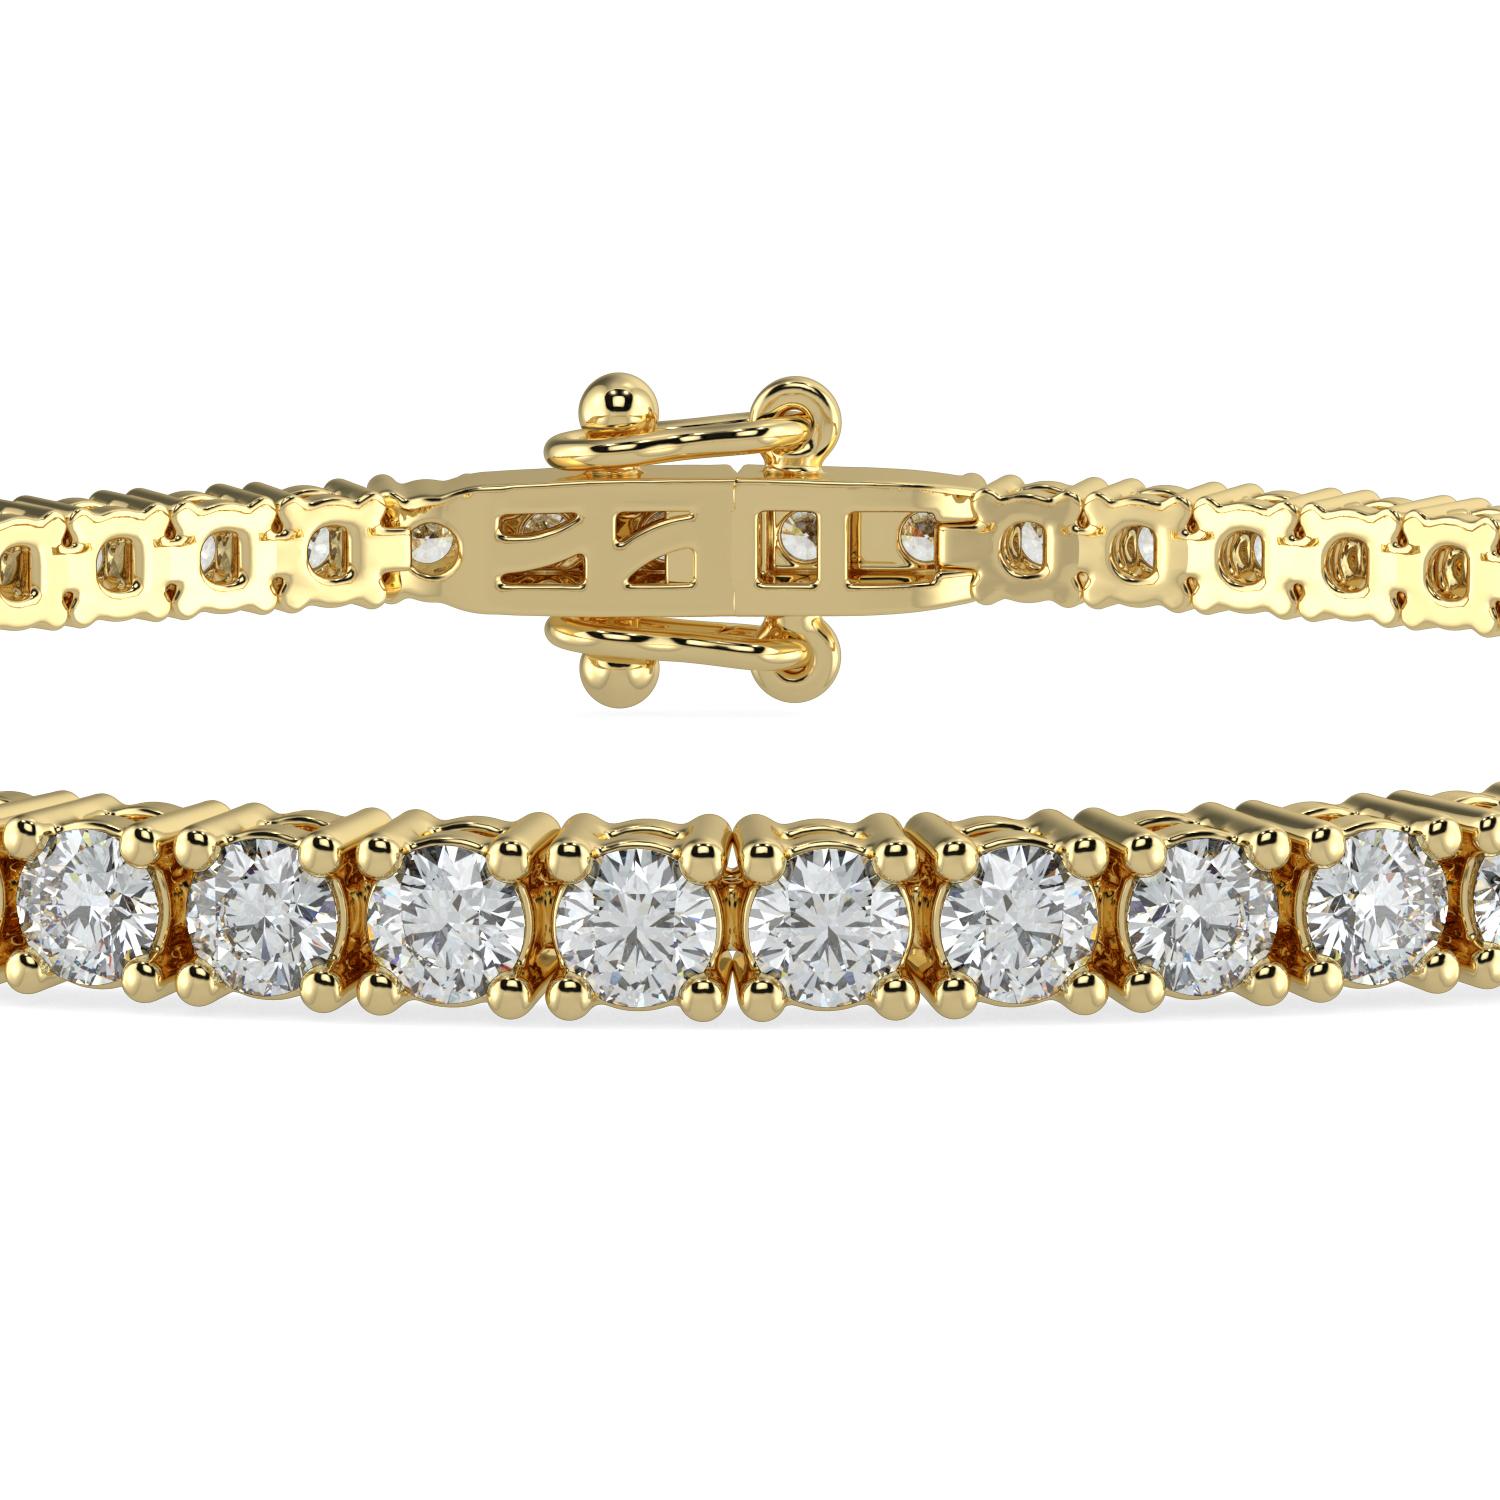 10.00 Carat Round Cut GH-SI Natural Diamond Classic Tennis Bracelet 4 Prong 14K Yellow Gold for Women

Specification
Brand: AAMIAA
Length: 7 Inches 
Color: GH
Carat Weight:10.00CTW
Clarity: SI

LUXURIOUS AND LASTING- Our bracelets are a luxurious